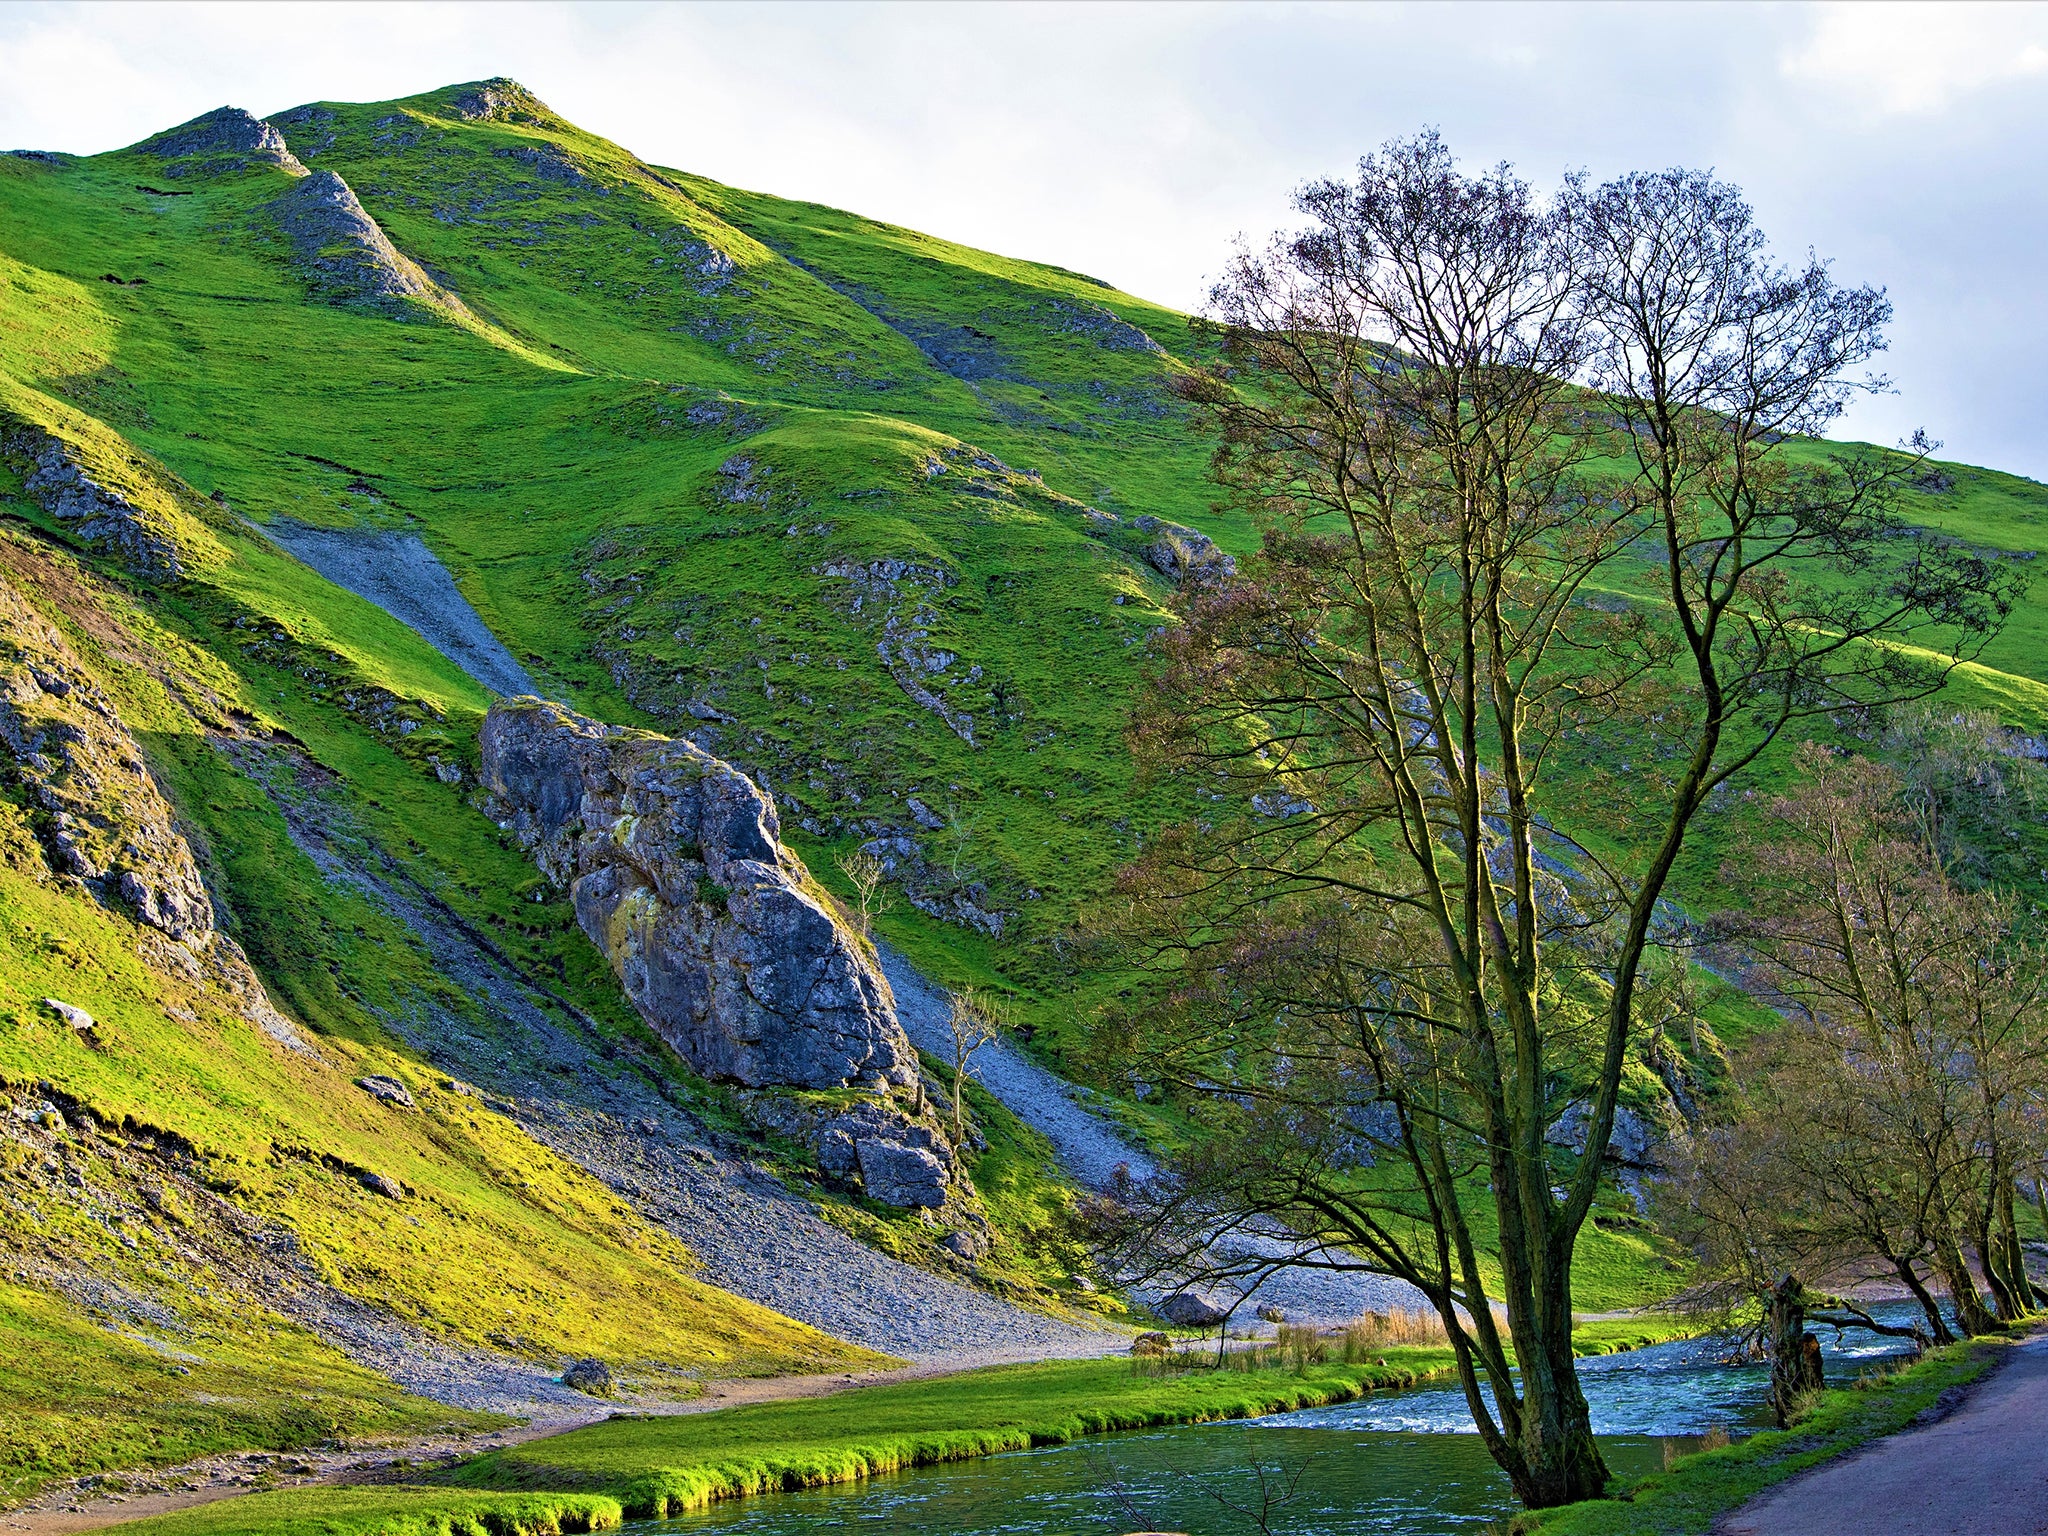 The mountain wilderness of Dovedale